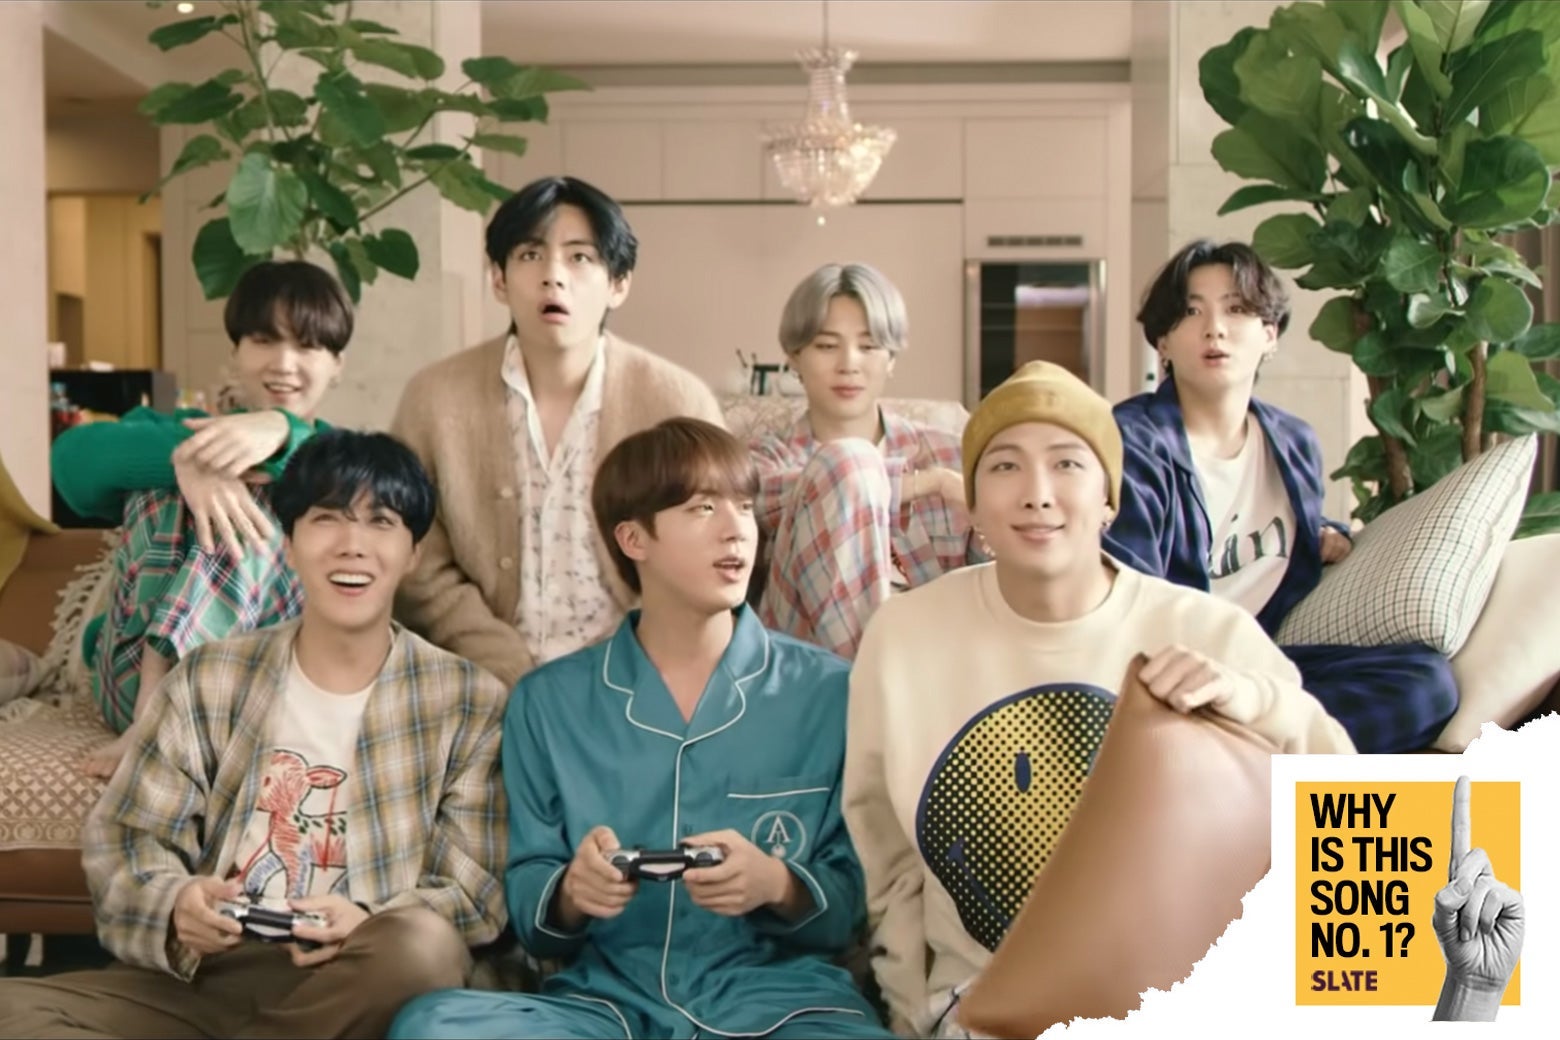 BTS hanging out together on the couch.